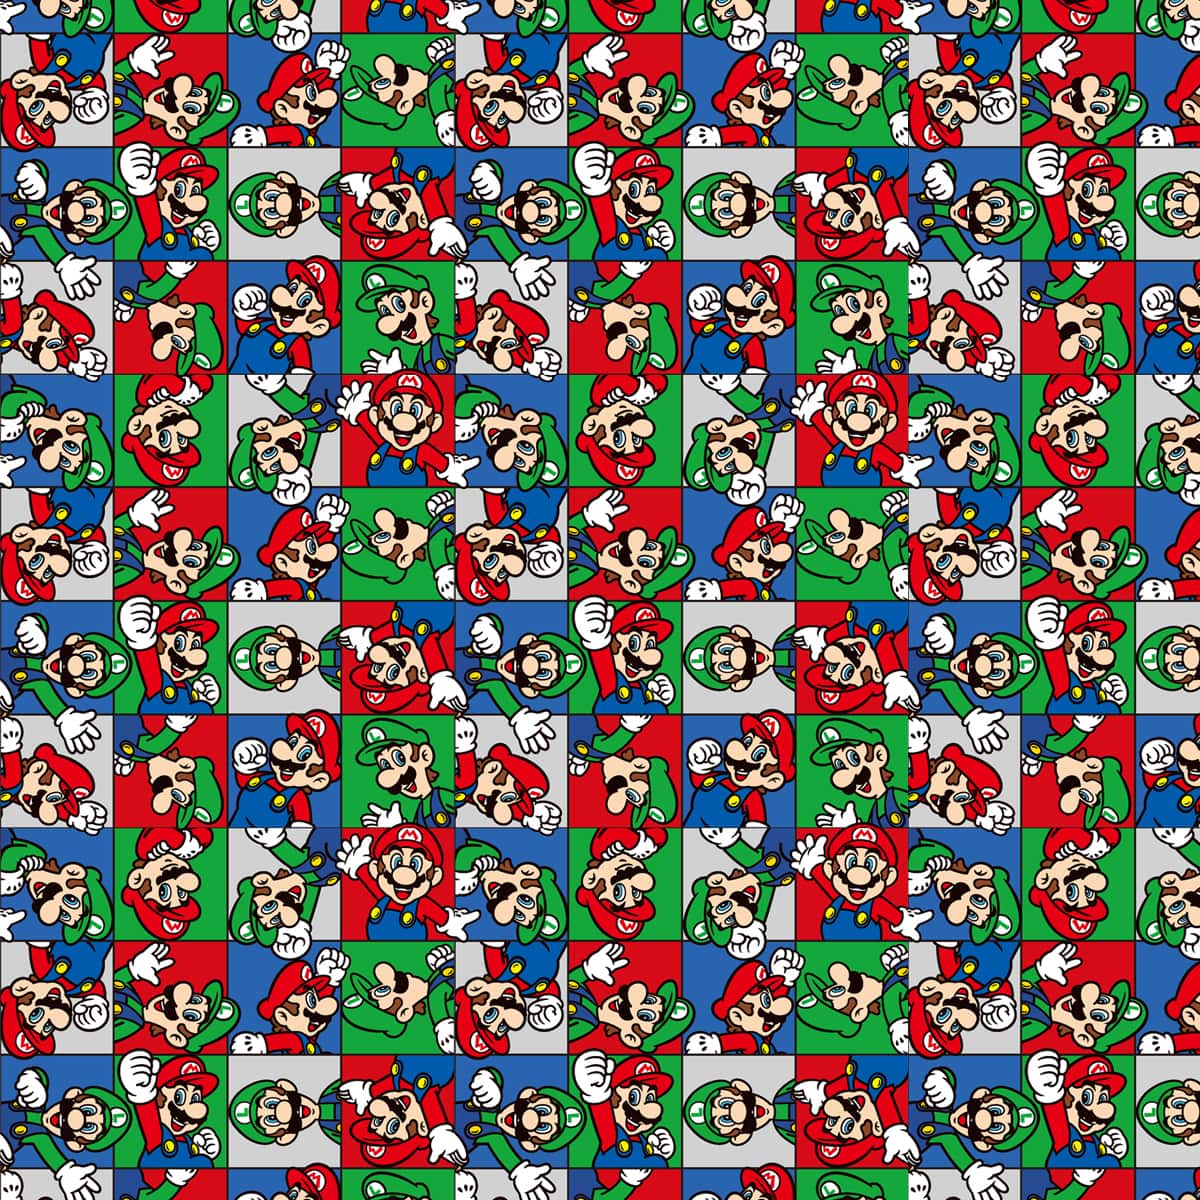 Super Mario Kit ** Includes Fabric Placement Design Chart/Pattern**